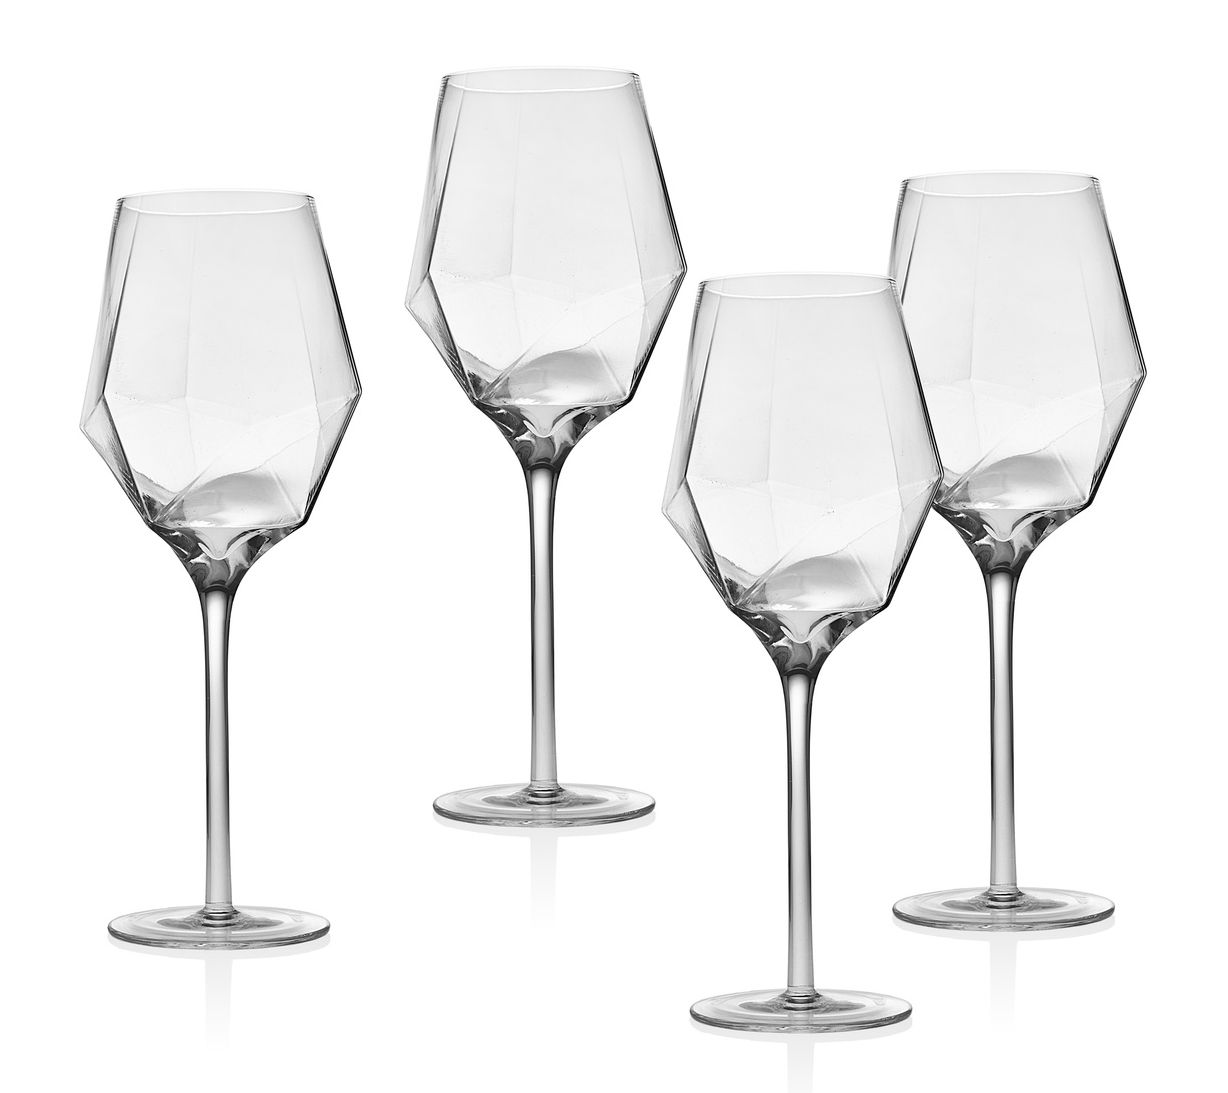 Libbey, Hammered All-Purpose Stemless Wine Glasses, Set of 8 - Zola